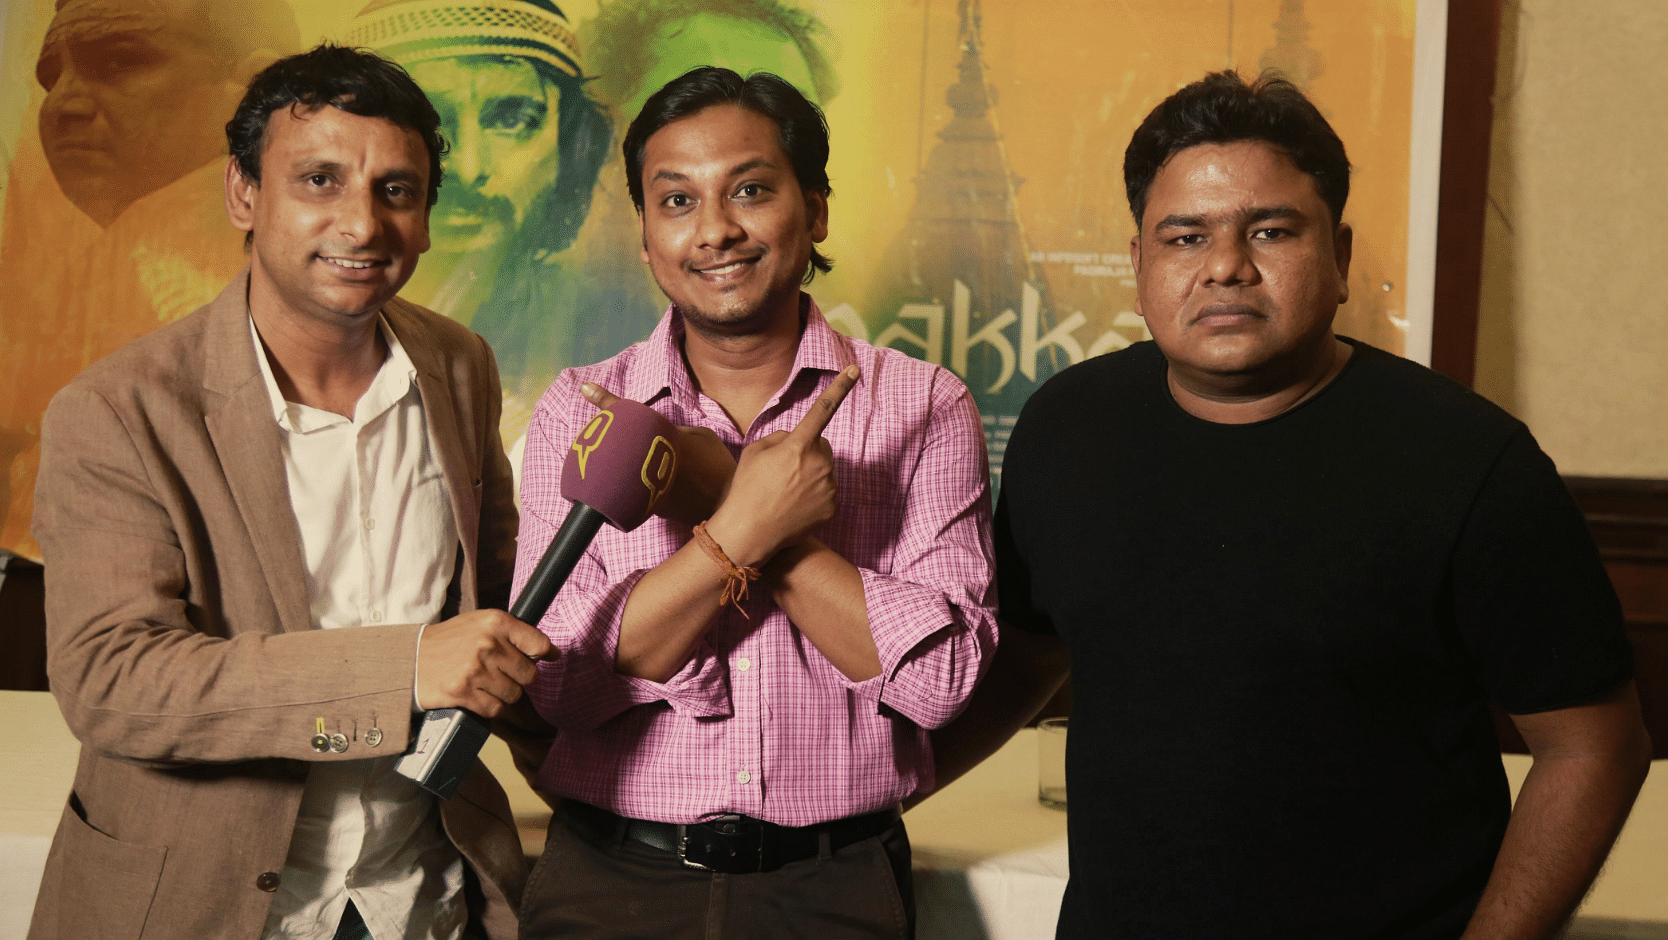 The Quint speaks to the writer-director Zaigham Imam and the lead actor Inaamulhaq of the film ‘Nakkash’.